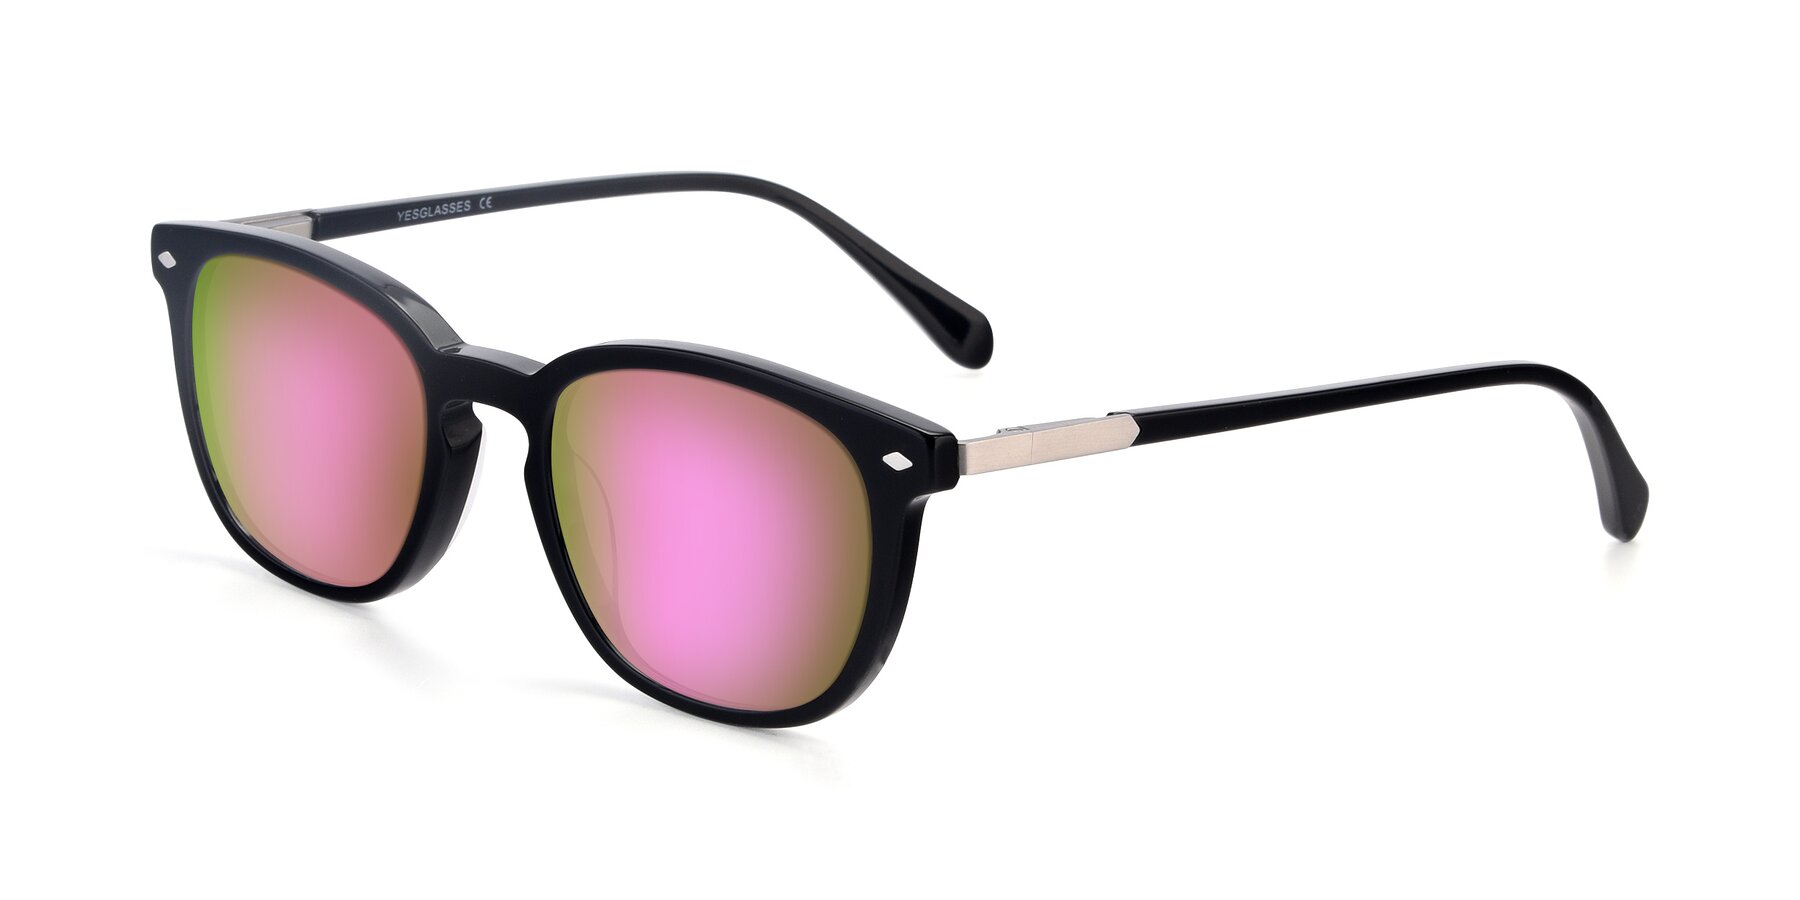 Angle of 17578 in Black with Pink Mirrored Lenses